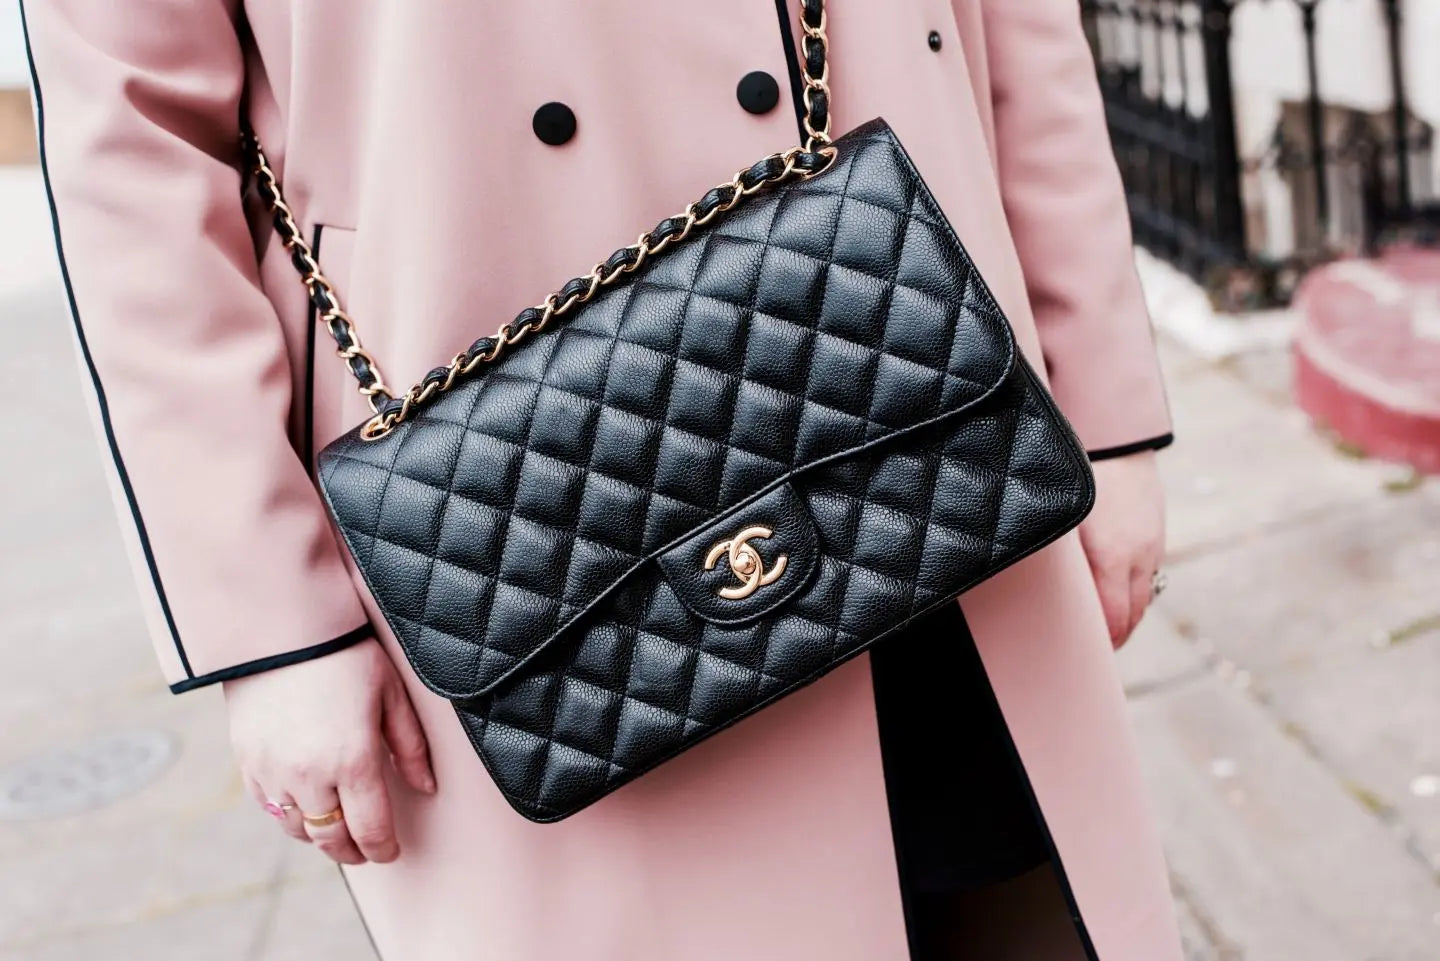 New Chanel Purchase Limit and Other Luxury Brands Limits